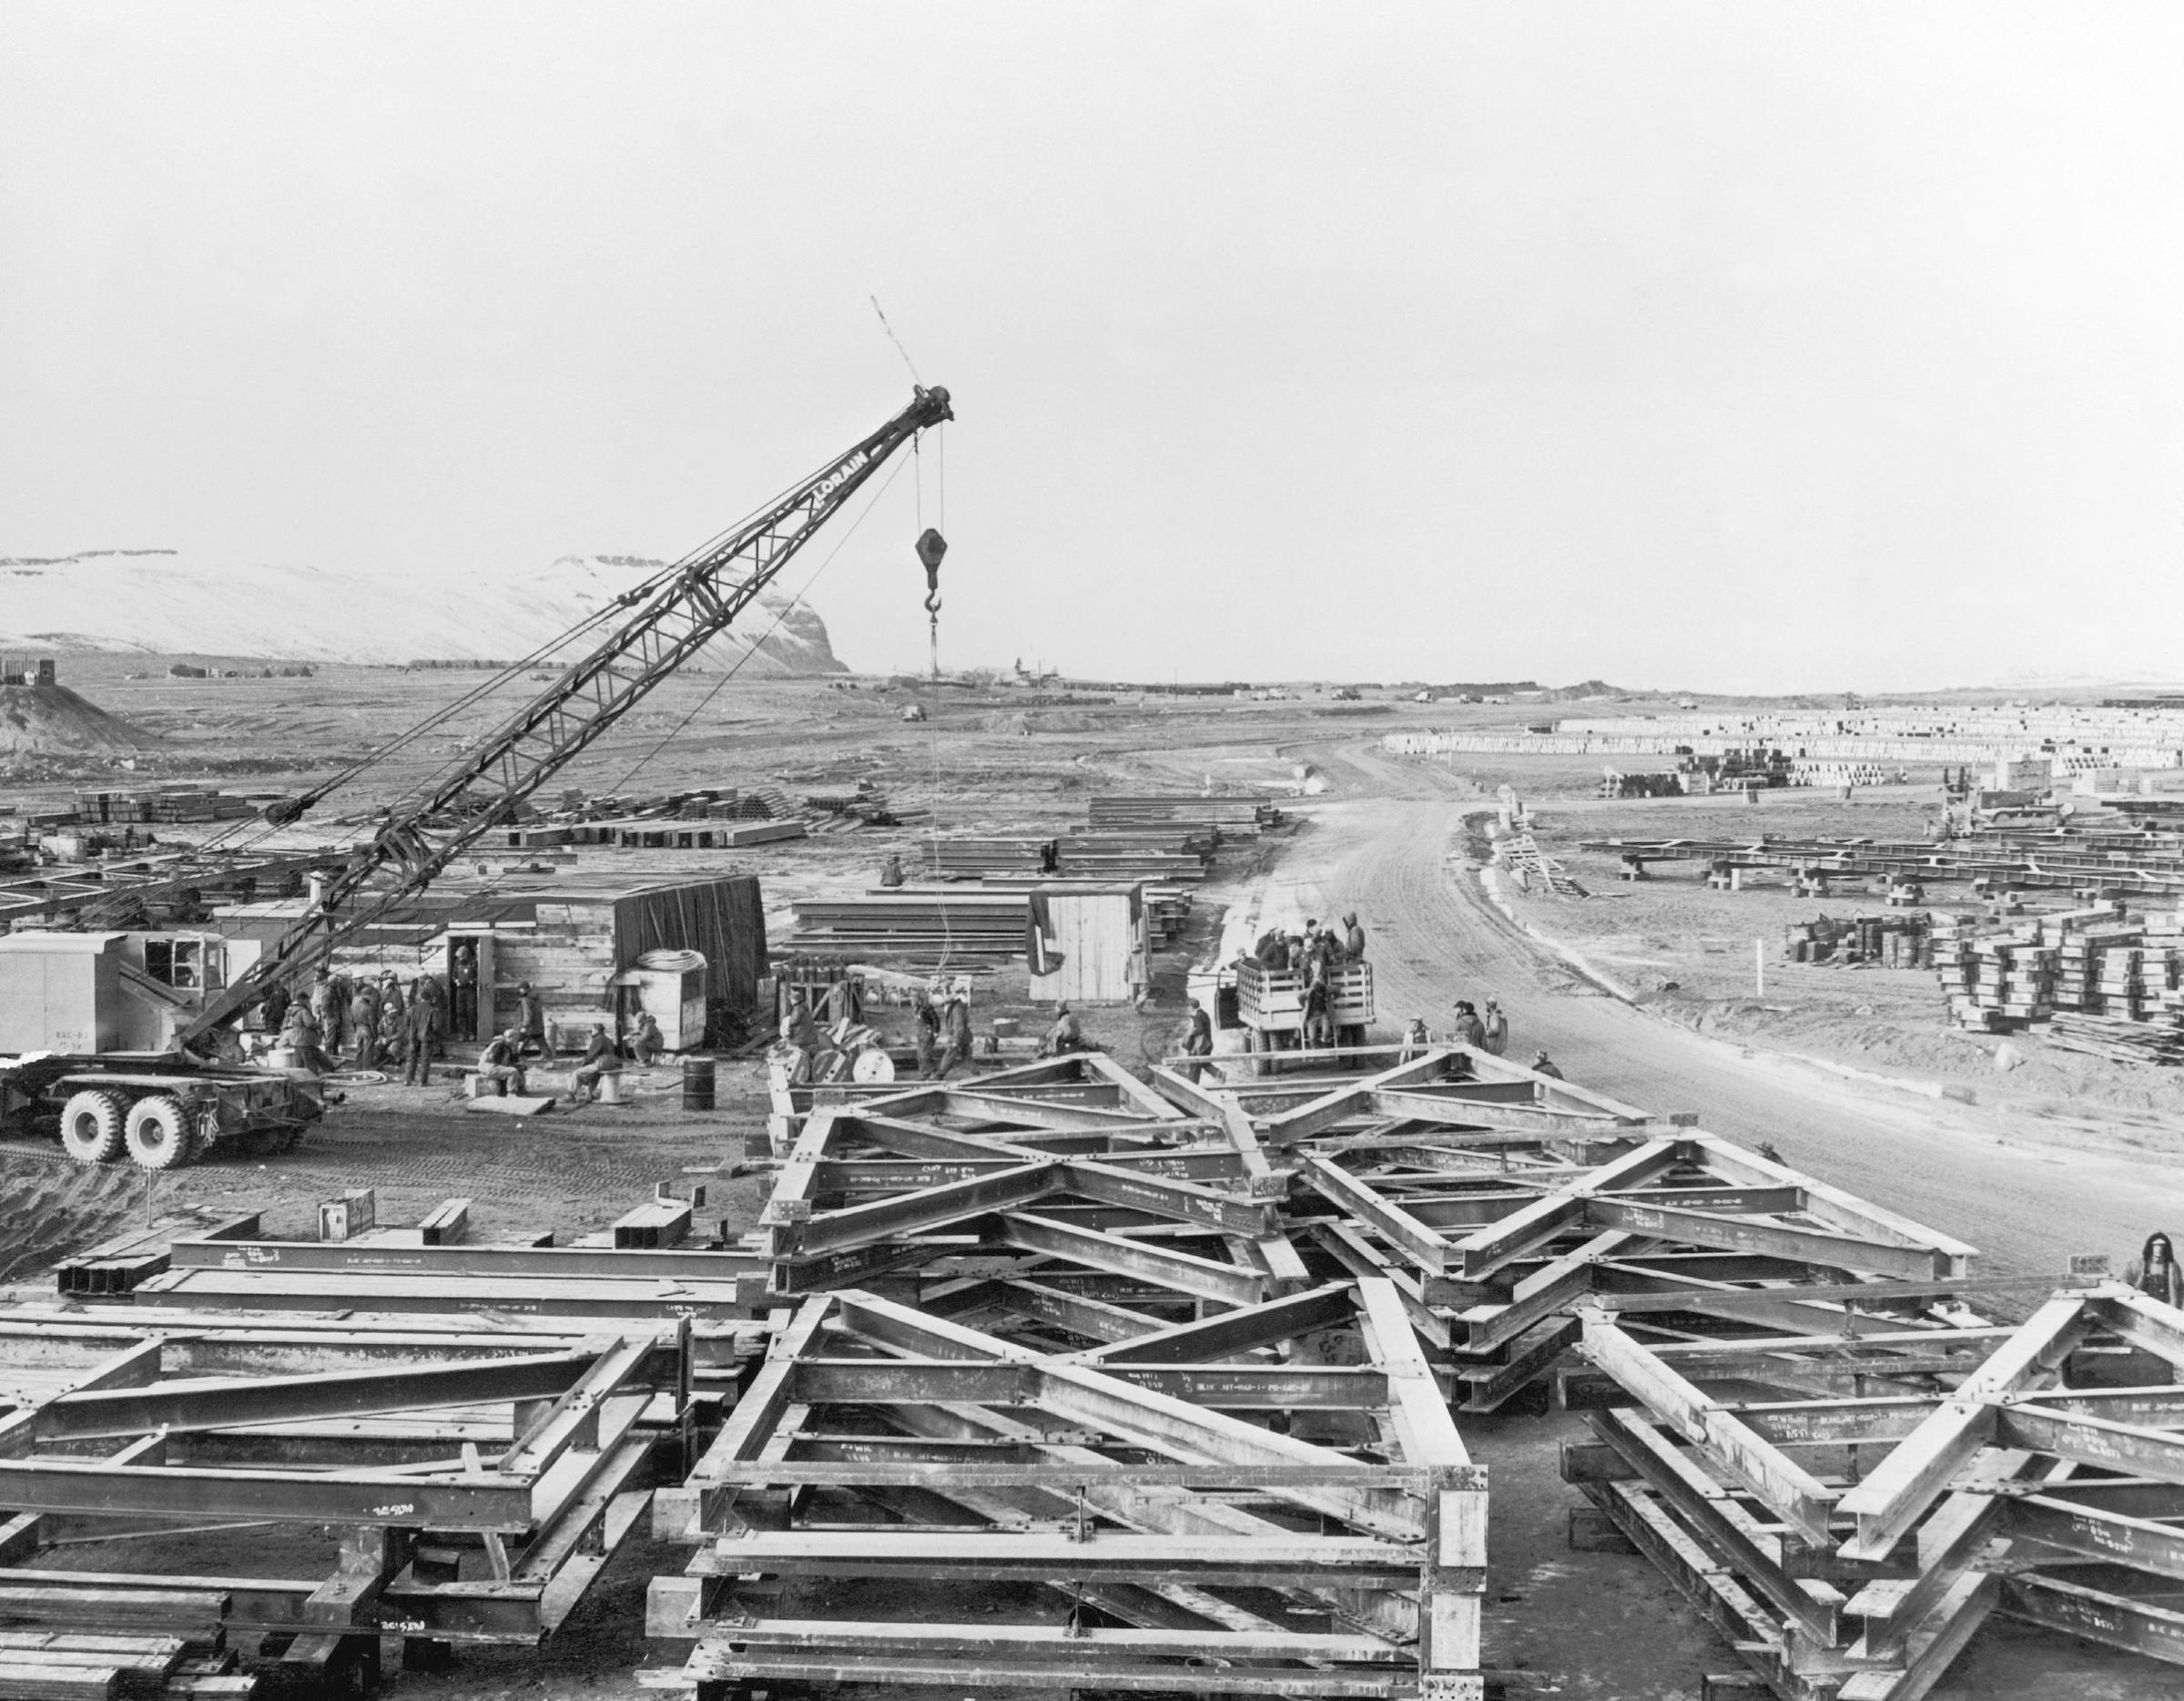 Construction Of The American Military Base In Thule Around 1953-1955